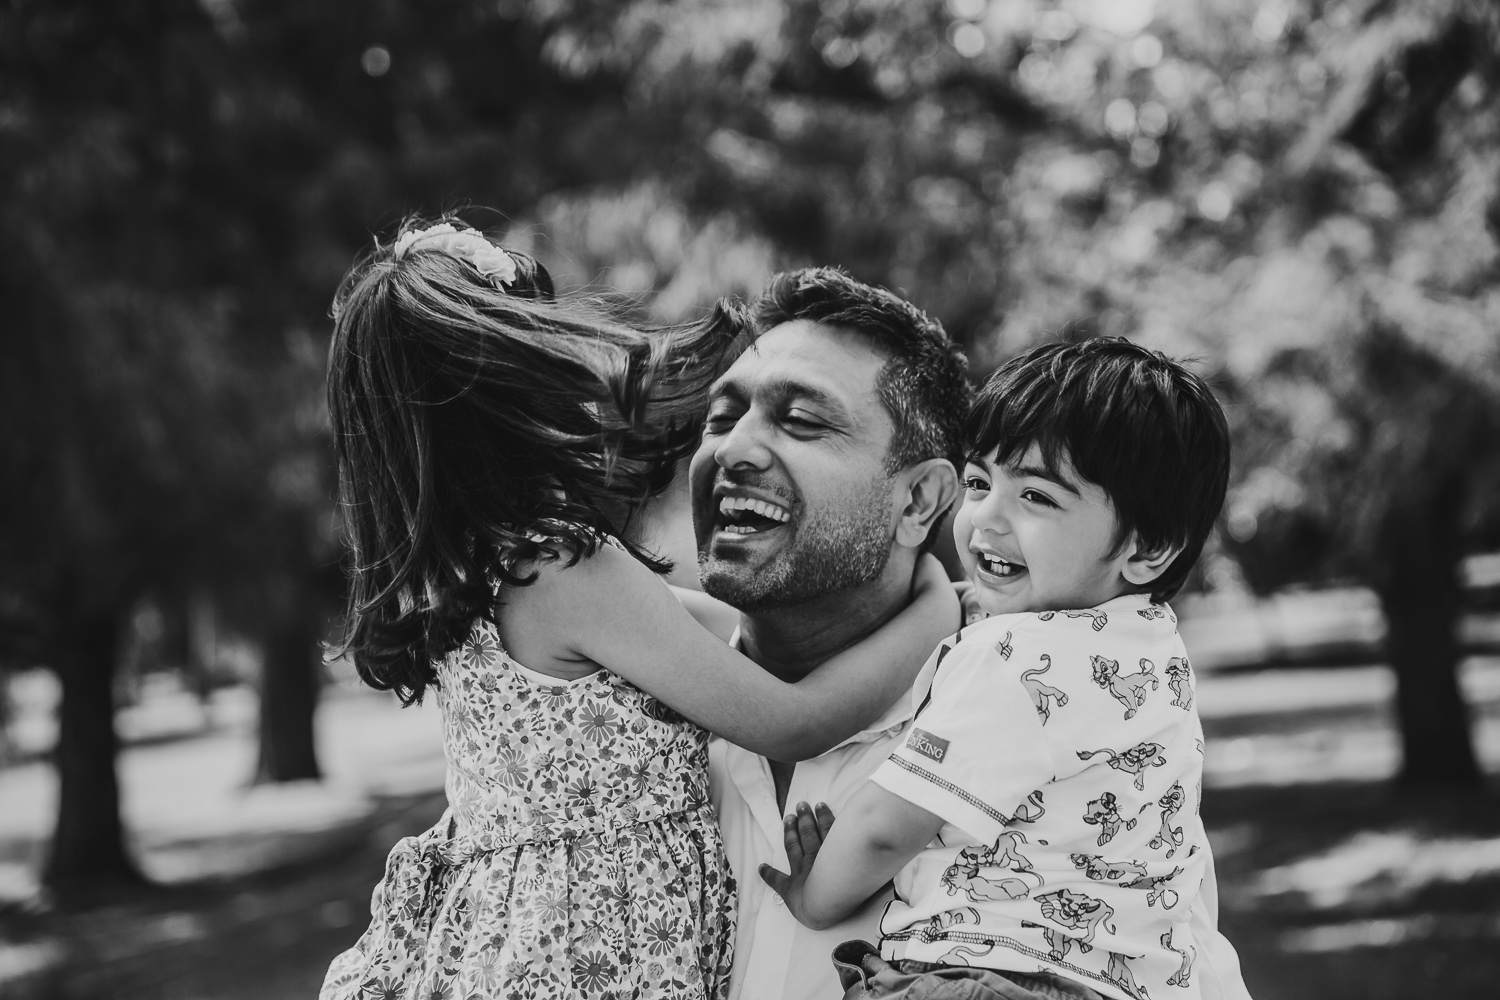 father laughs with and hugs his two children - one boy one girl